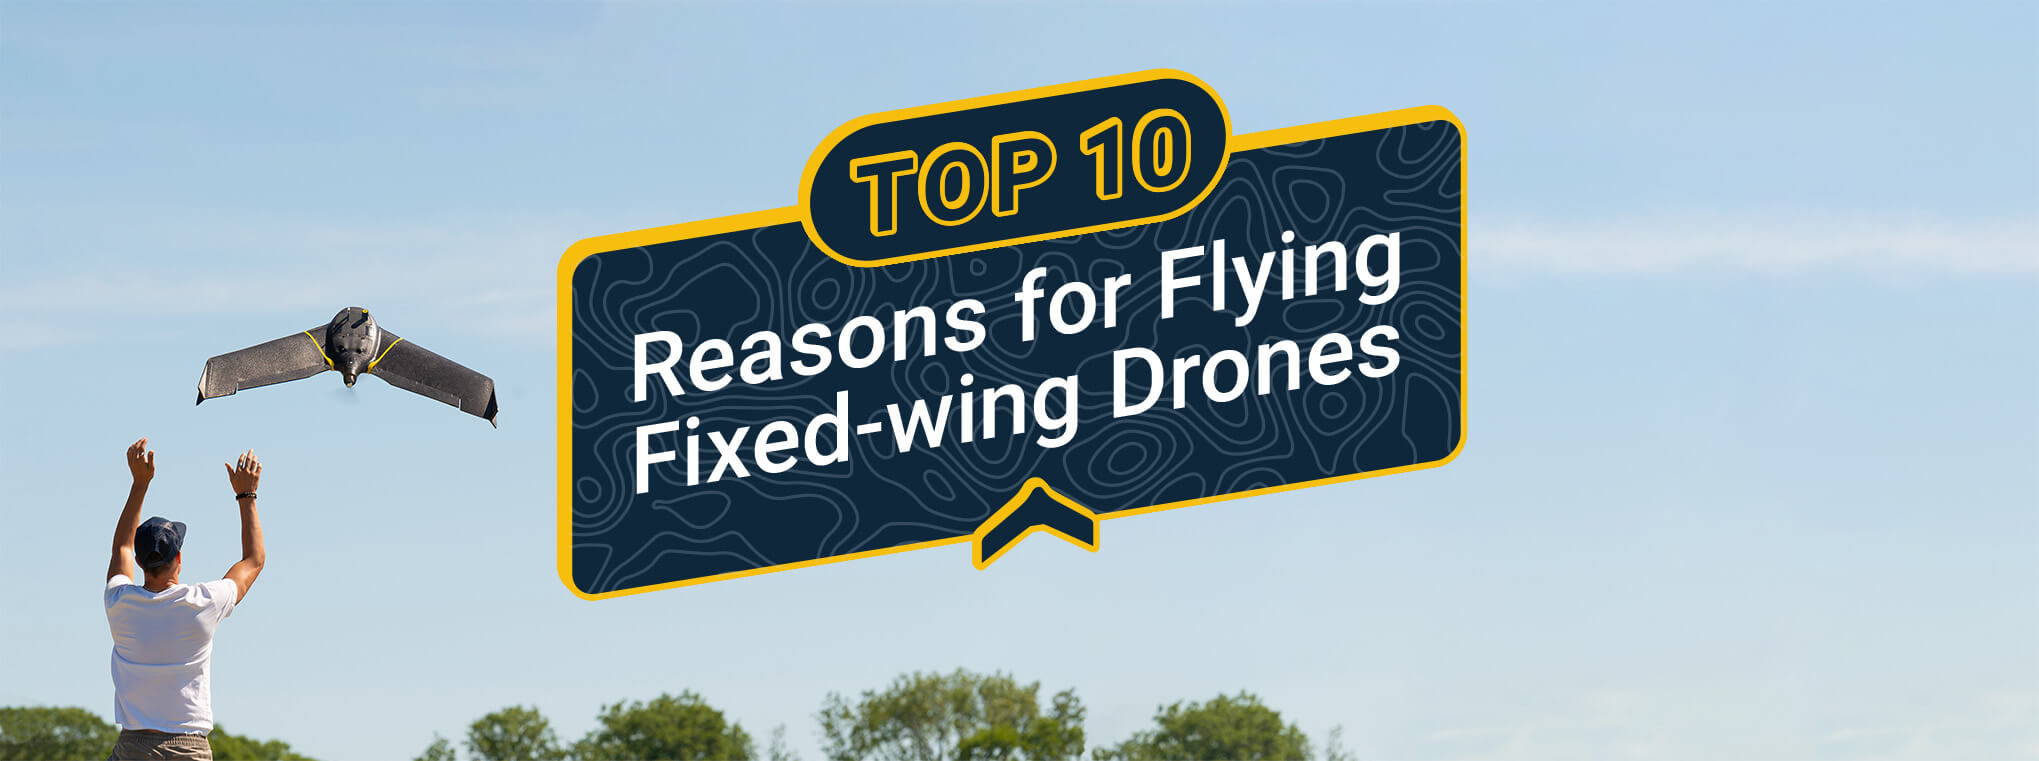 Top 10 reasons to fly fixed-wing drones - AgEagle Aerial Systems Inc.